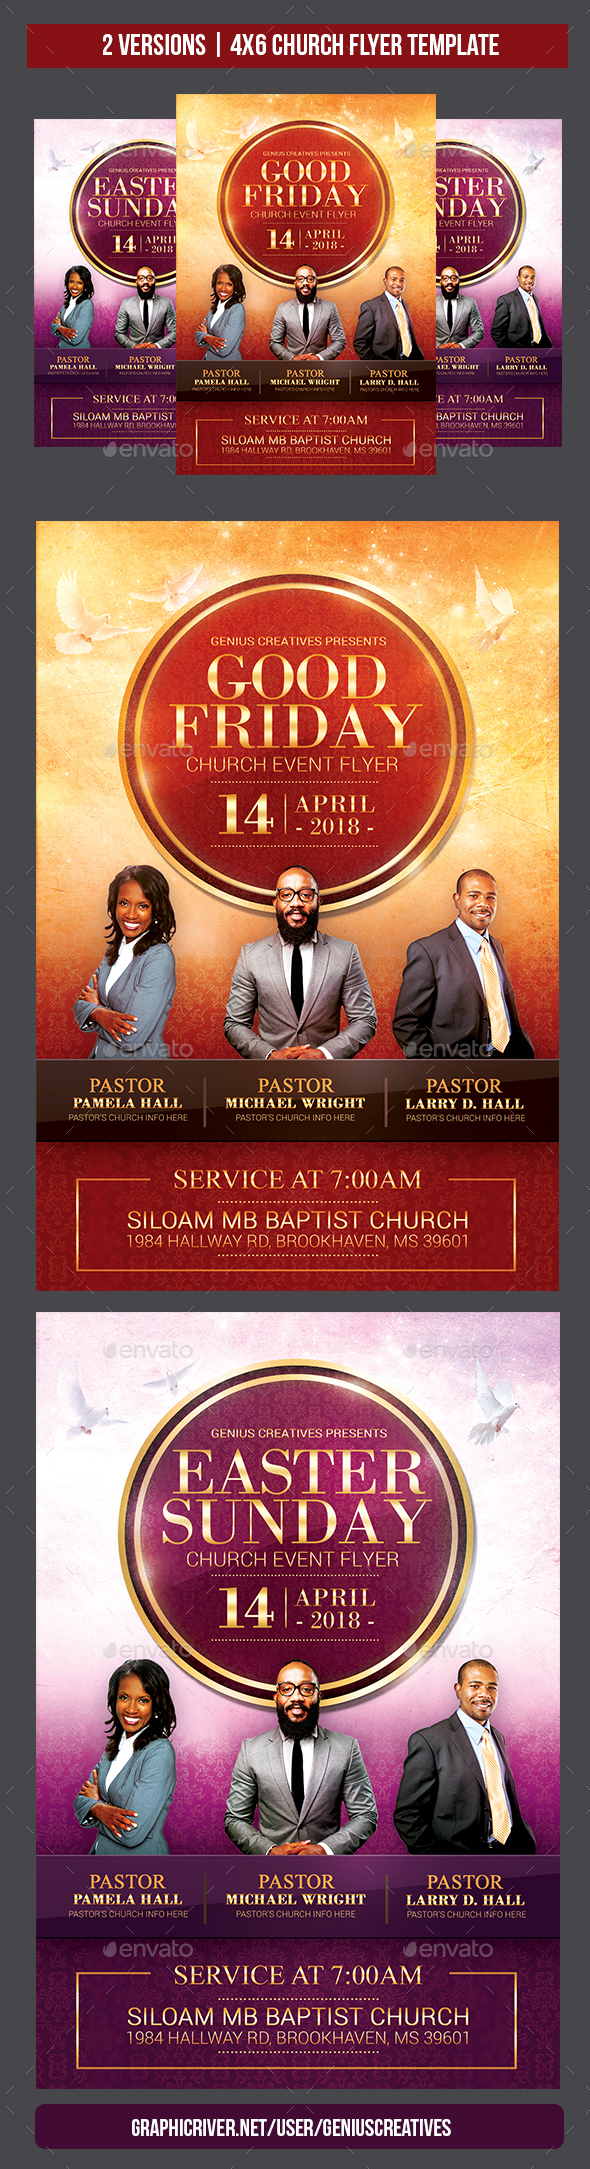 Revival Church Flyer Templates From GraphicRiver Regarding Church Revival Flyer Template